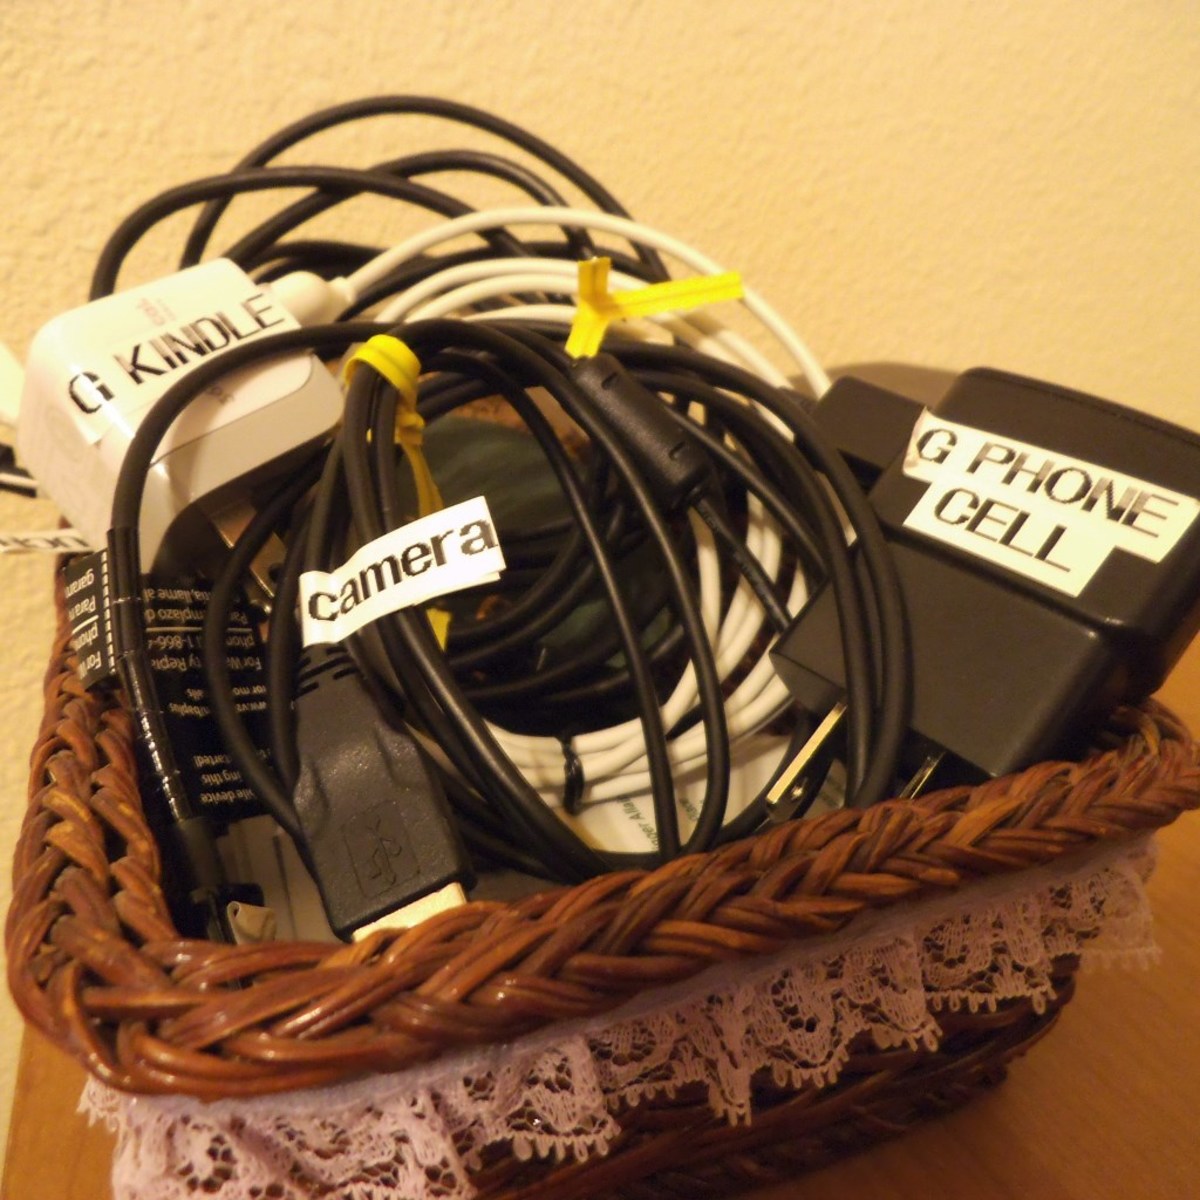 Label the cords for all your gadgets (Kindle, cell phone, digital cameras)